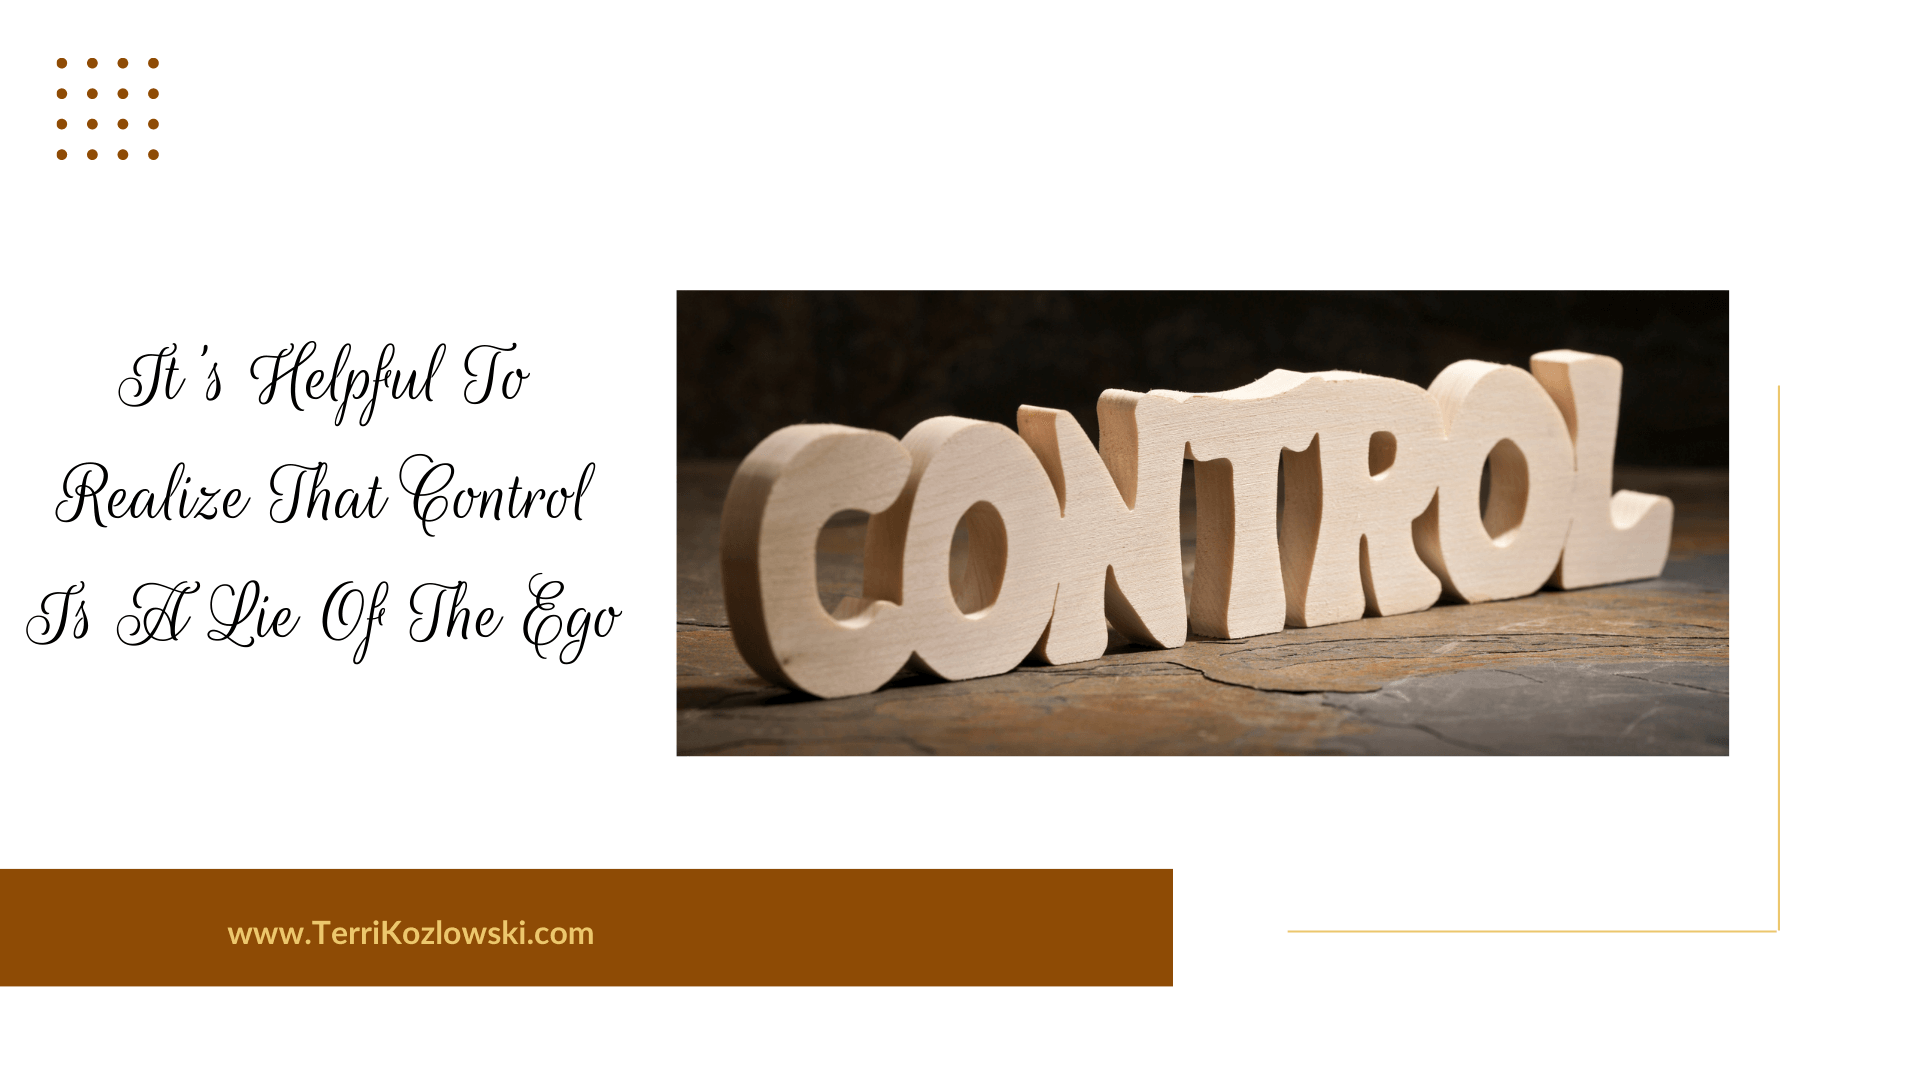 It's Helpful To Realize That Control Is A Lie The Ego Uses To Hinder You